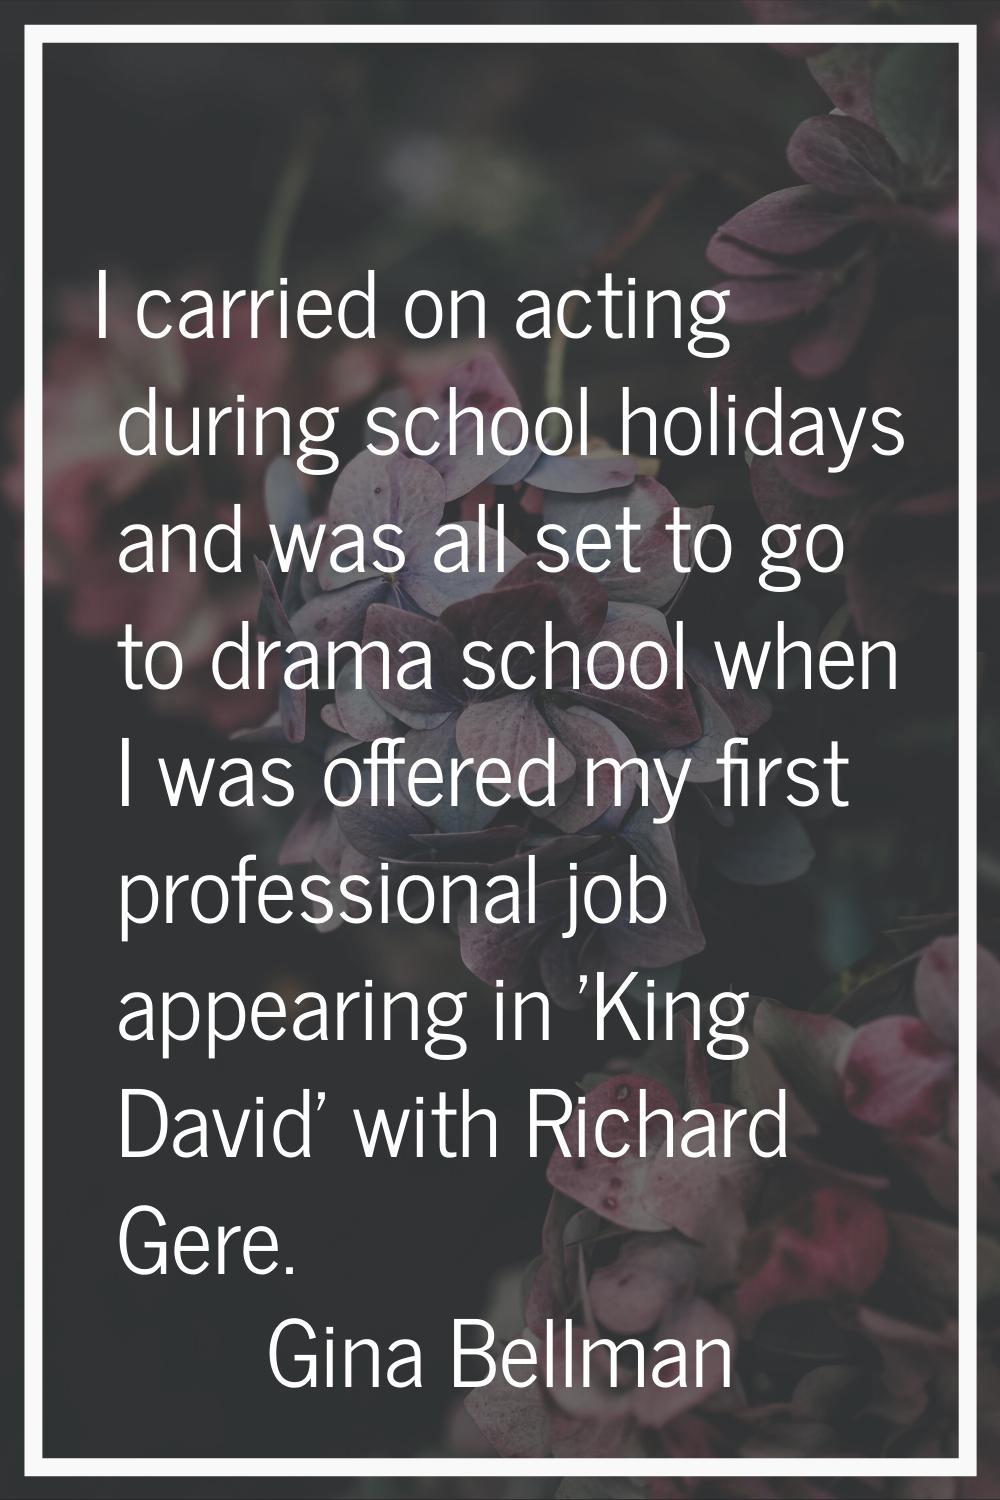 I carried on acting during school holidays and was all set to go to drama school when I was offered